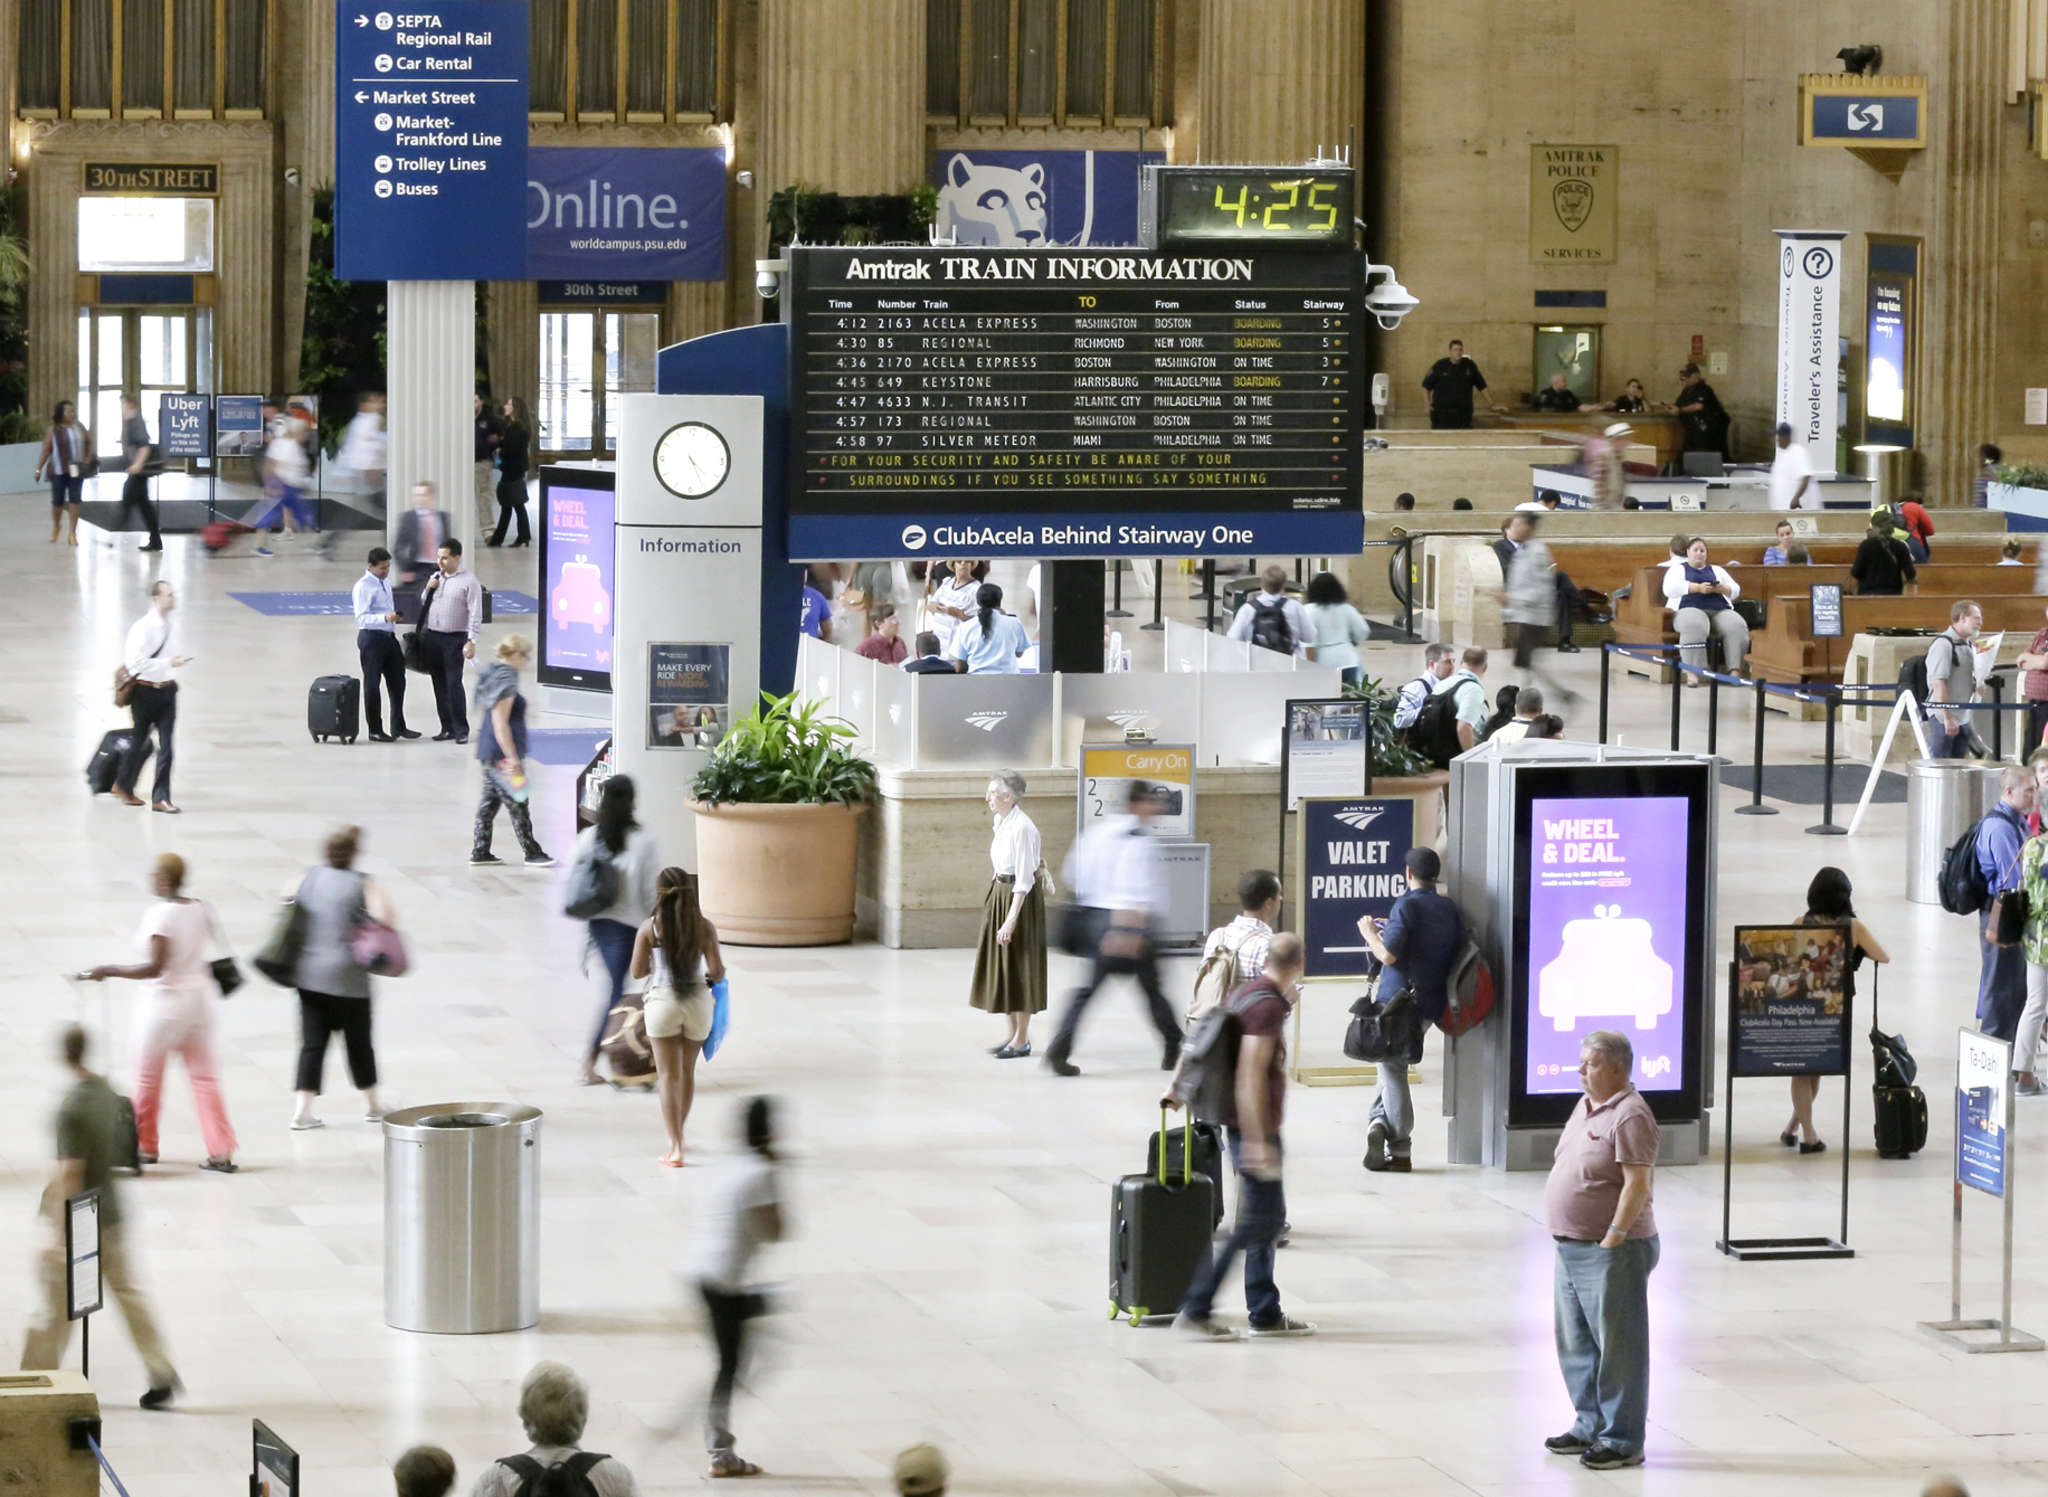 Grand Central Station & New York City -- Station Goes Digital by Replacing  Split-Flap Solari Boards